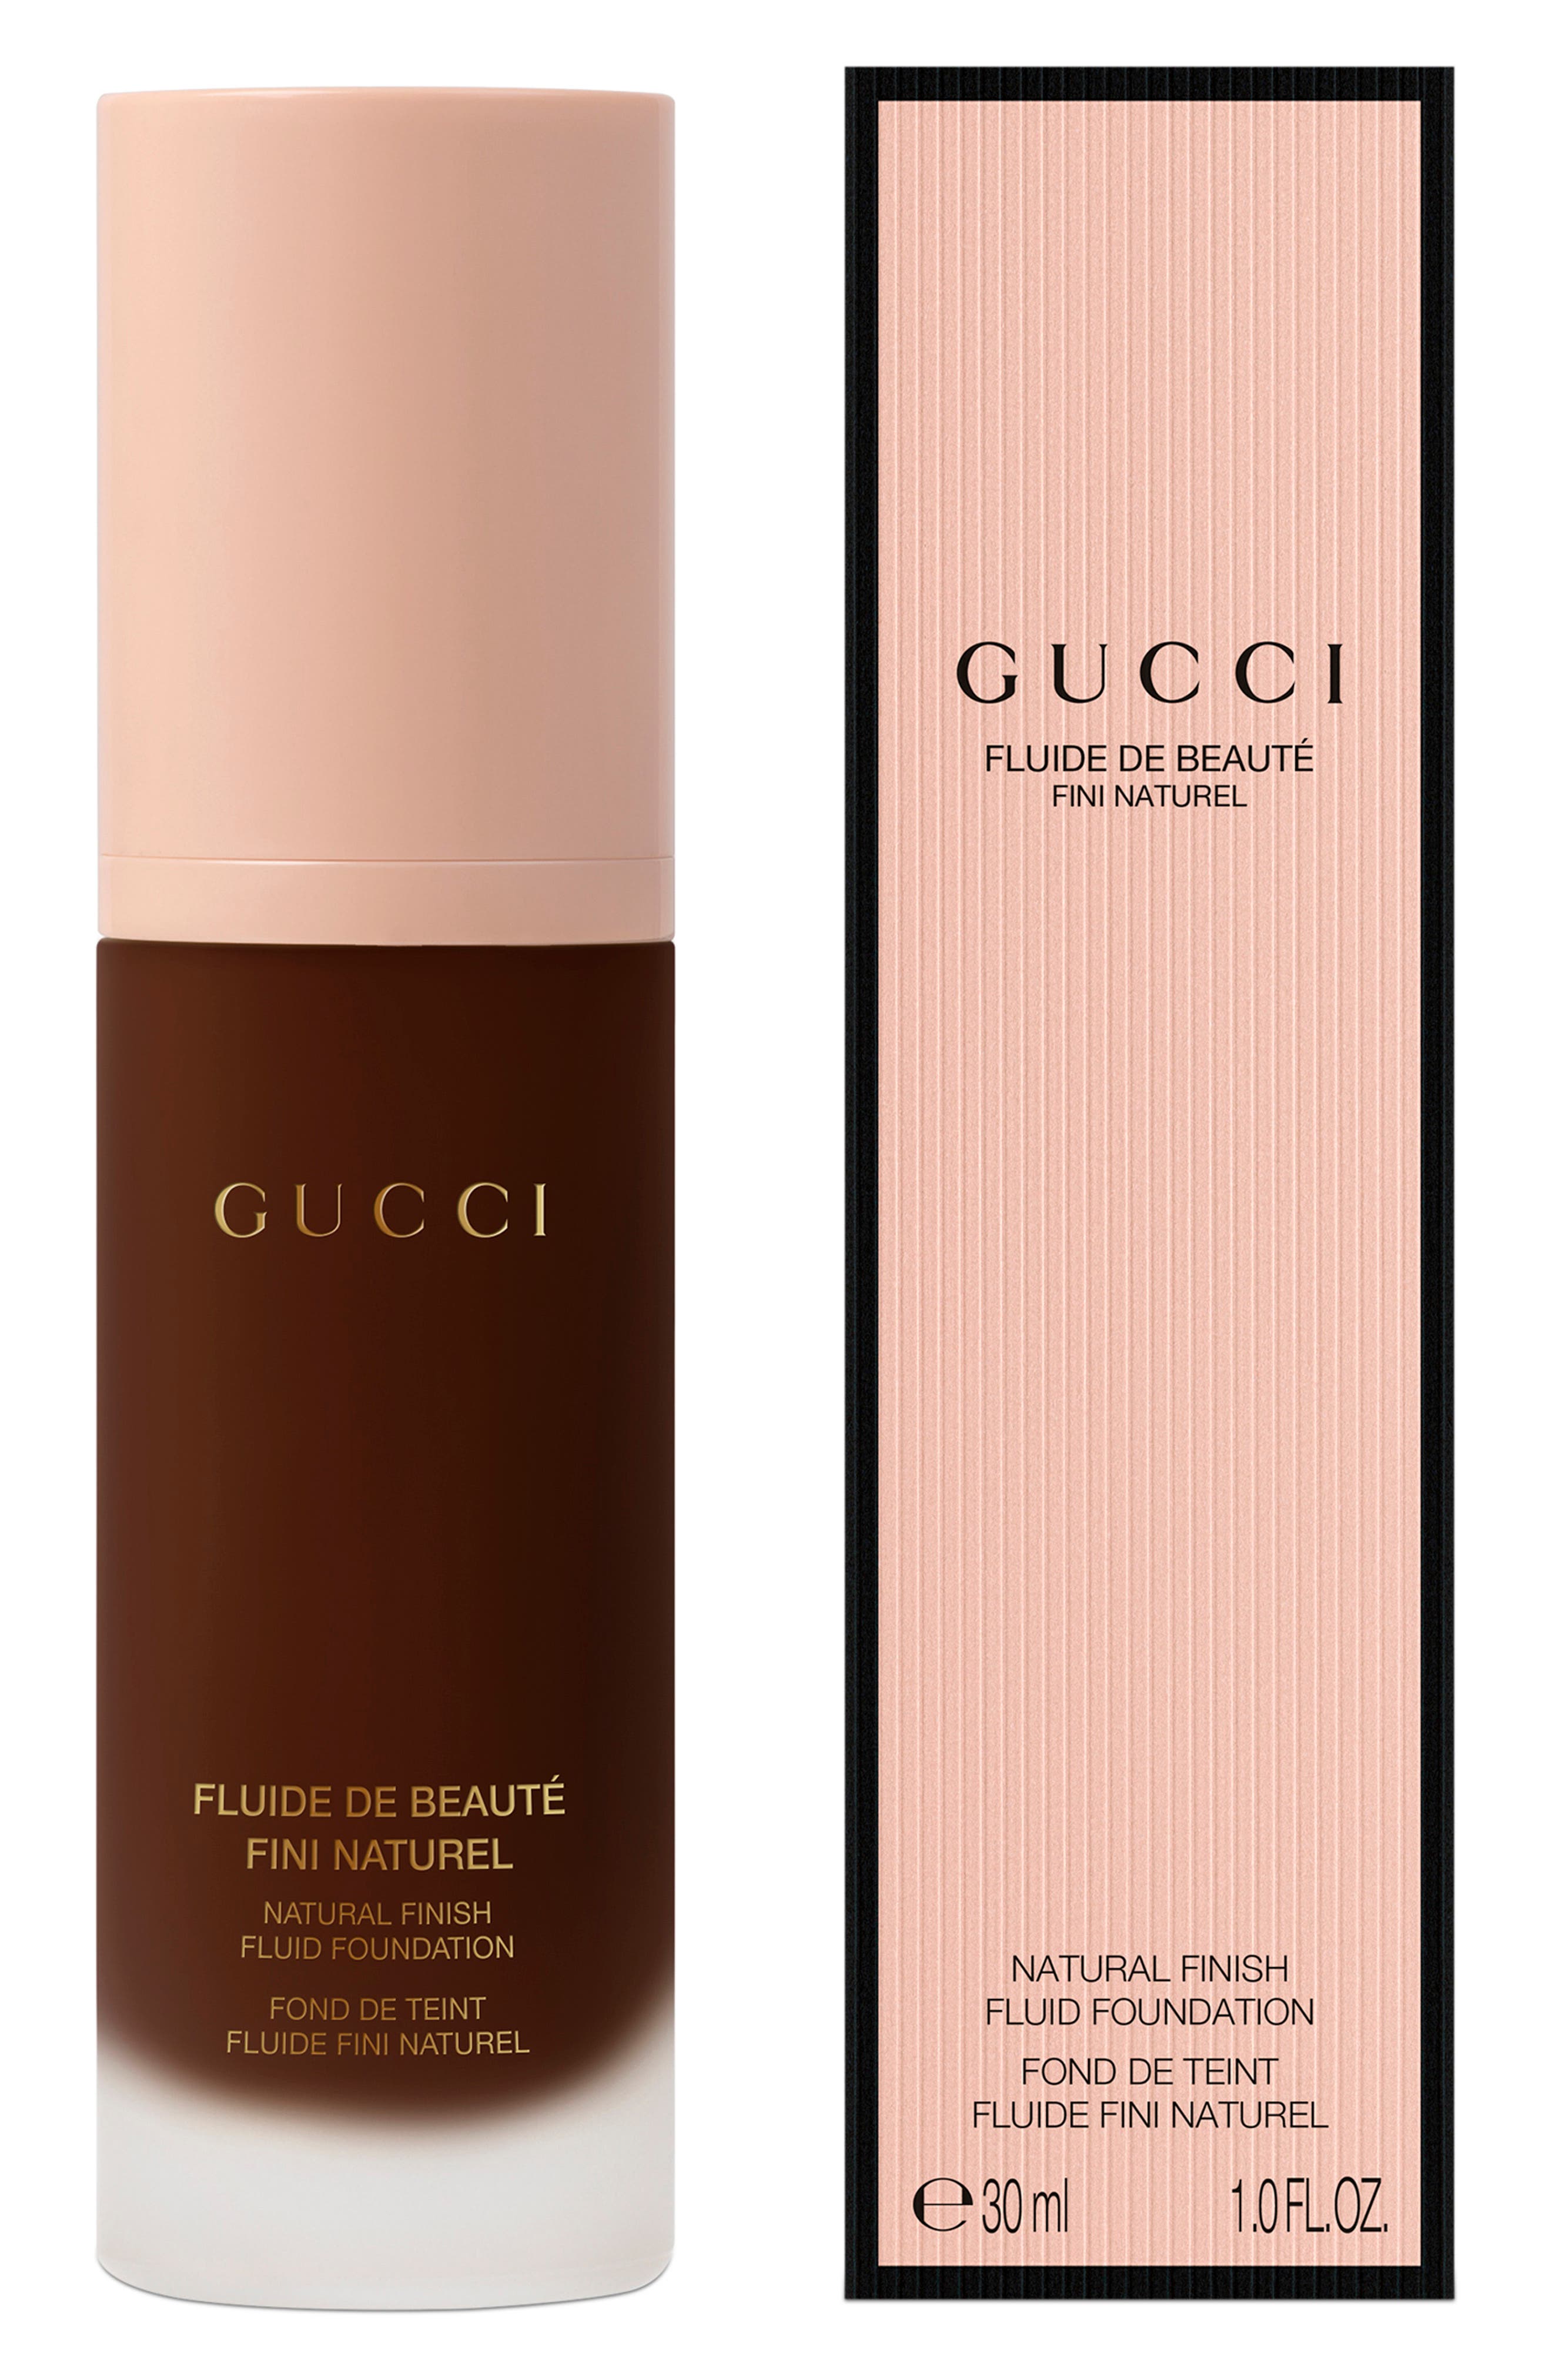 Gucci Natural Finish Fluid Foundation in 530N at Nordstrom